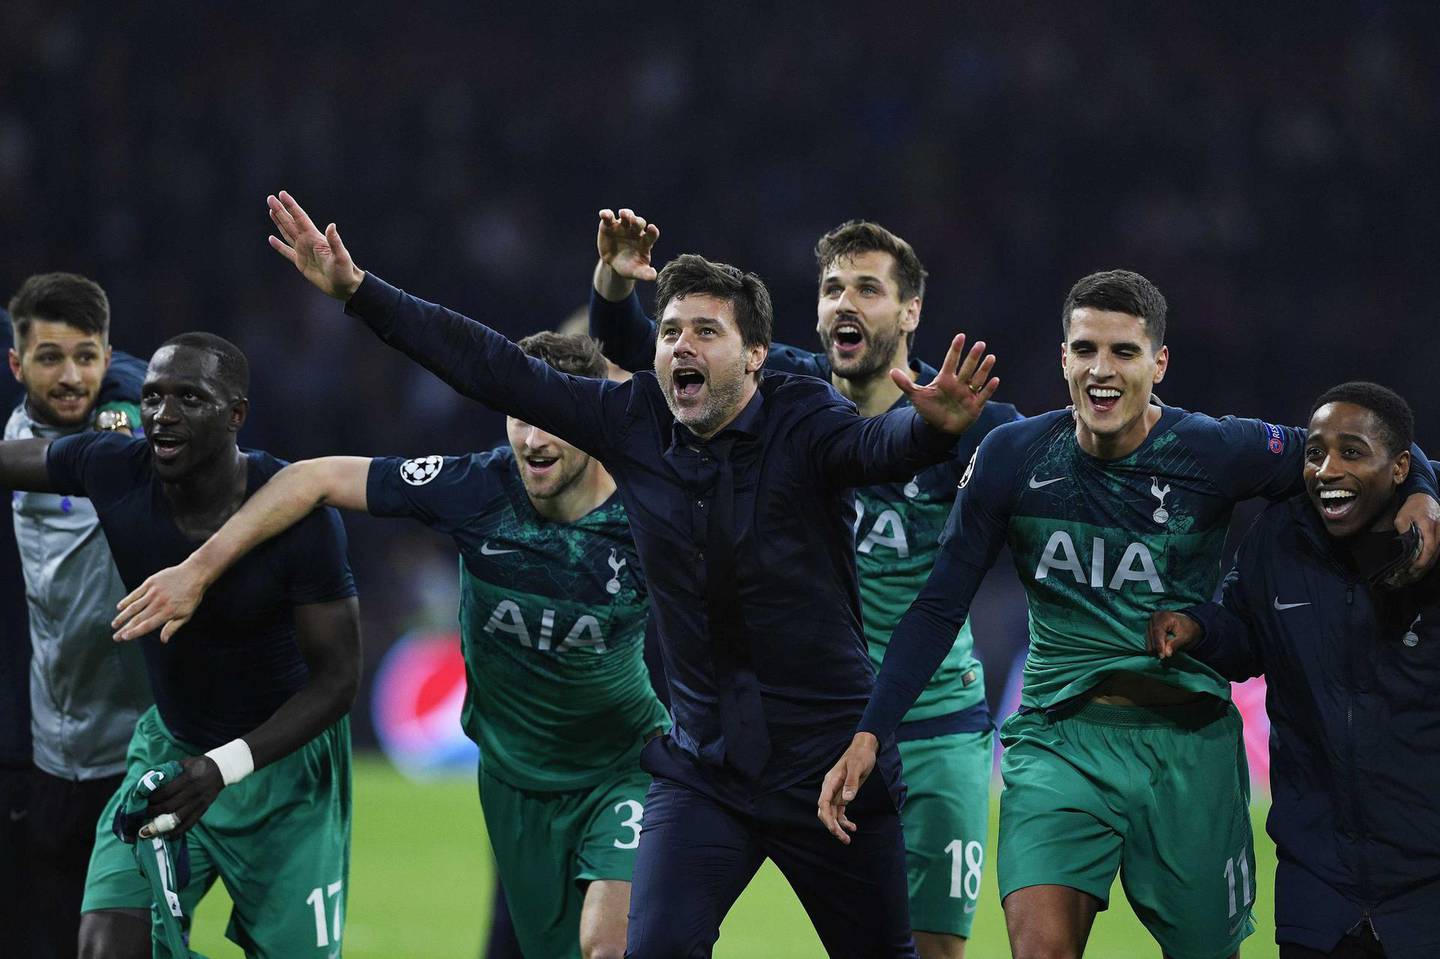 epa08010882 (FILE) - Manager Mauricio Pochettino (C) and players of Tottenham Hotspur celebrate after the UEFA Champions League semi final, second leg soccer match between Ajax Amsterdam and Tottenham Hotspur in Amsterdam, The Netherlands, 08 May 2019 (re-issued 20 November 2019). Tottenham Hotspur has sacked Mauricio Pochettino according to a club statement on 19 November.  EPA/OLAF KRAAK *** Local Caption *** 55177958